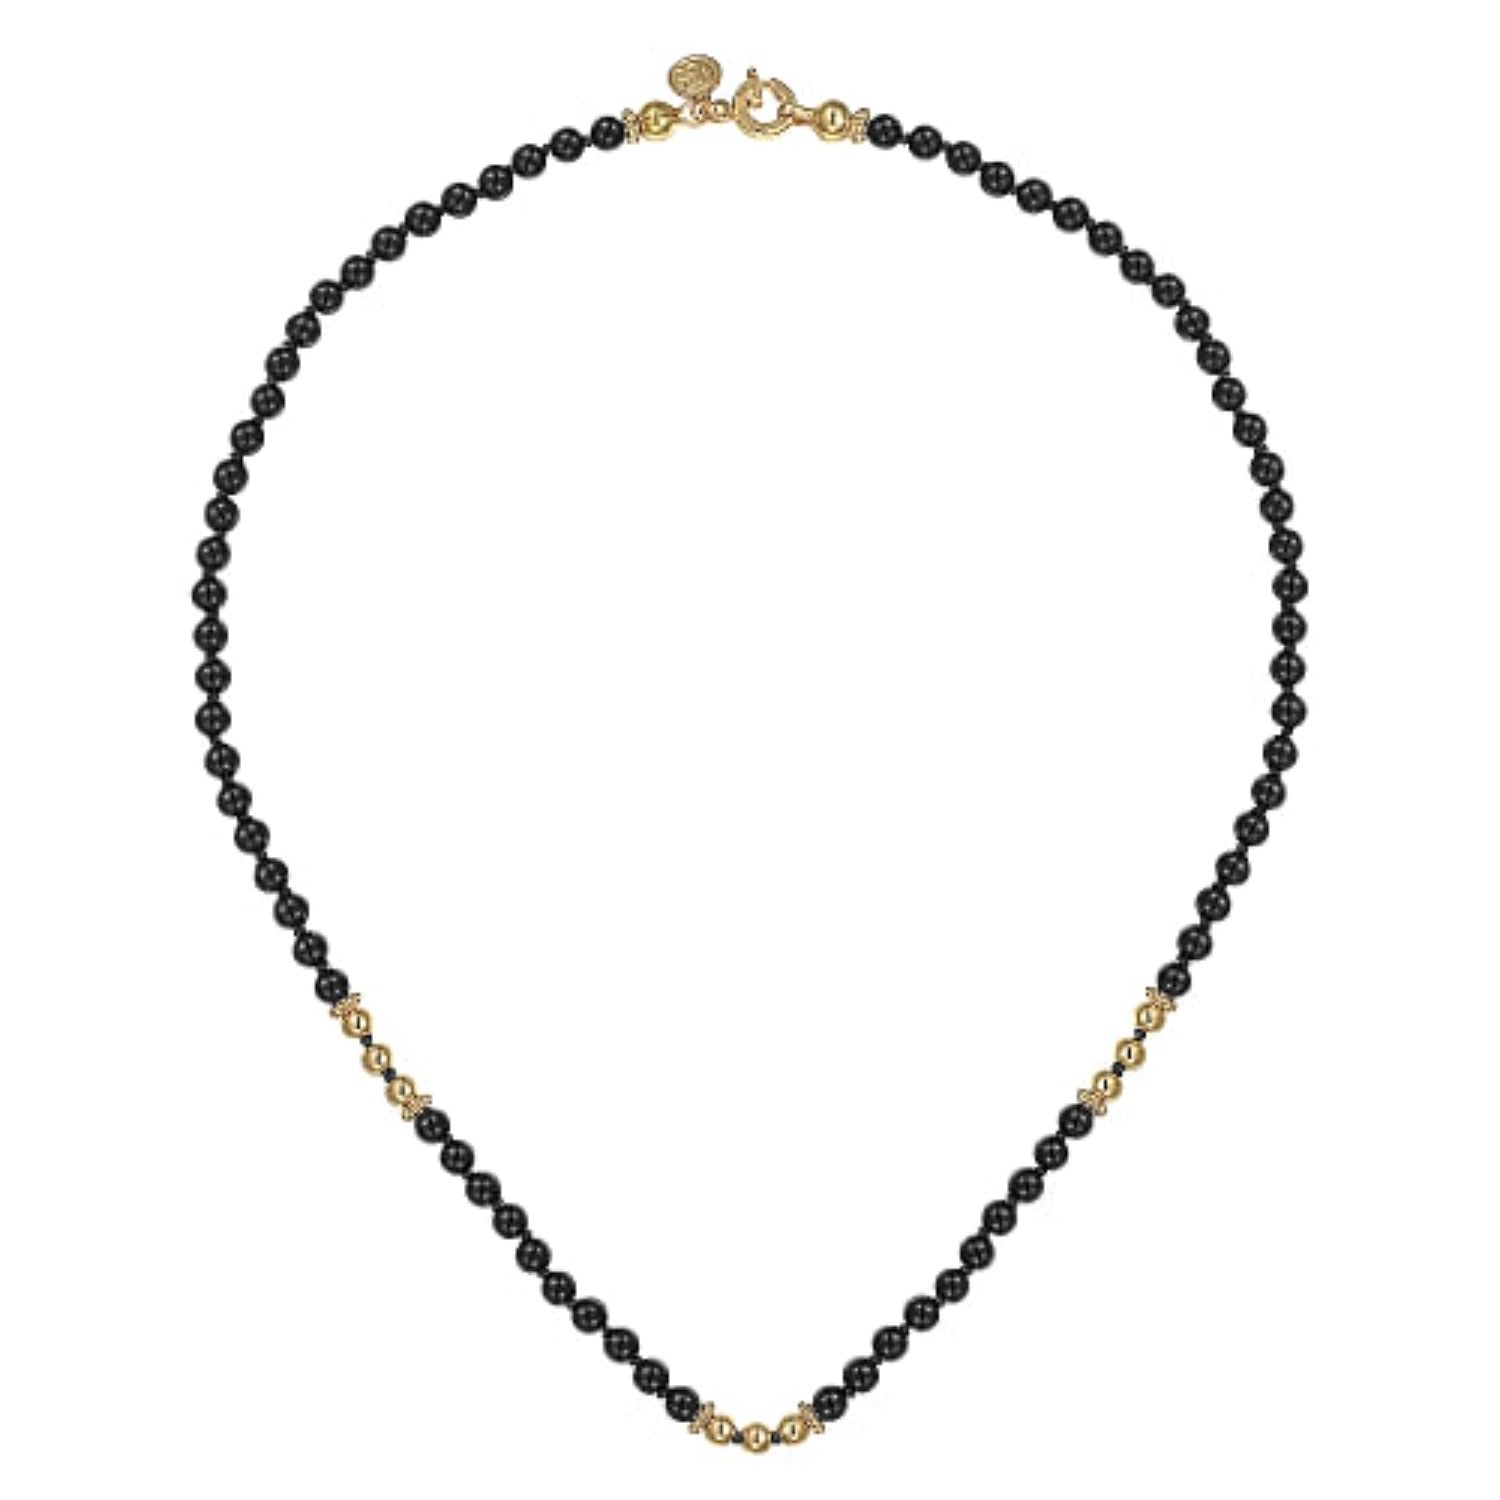 Latest One Gram Micro Gold Black Beads Chain - Sasitrends | Sasitrends